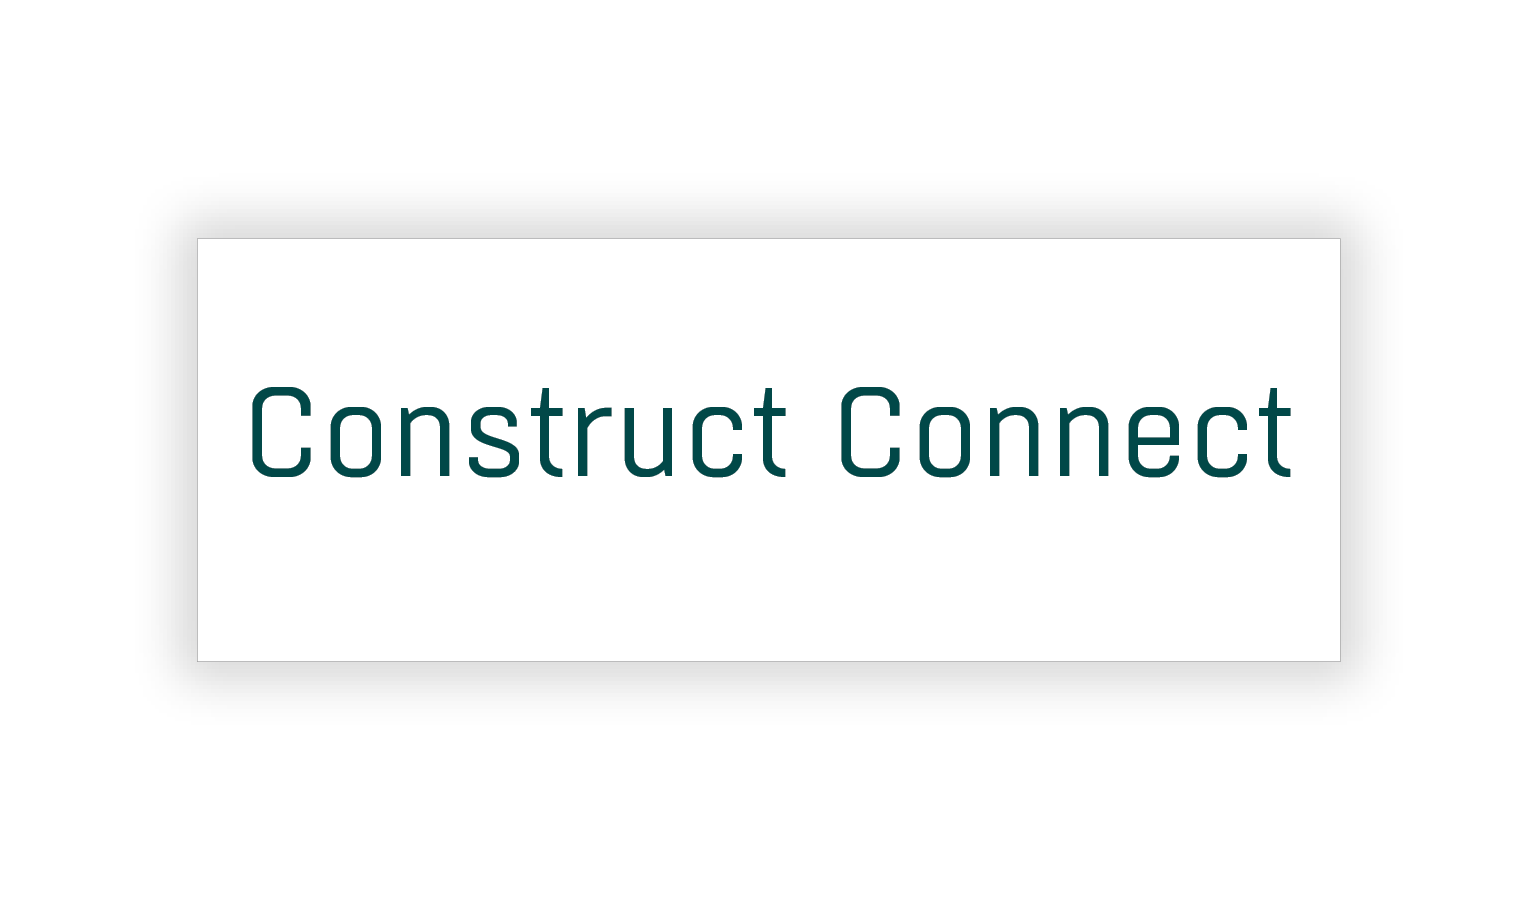 Construct Connect